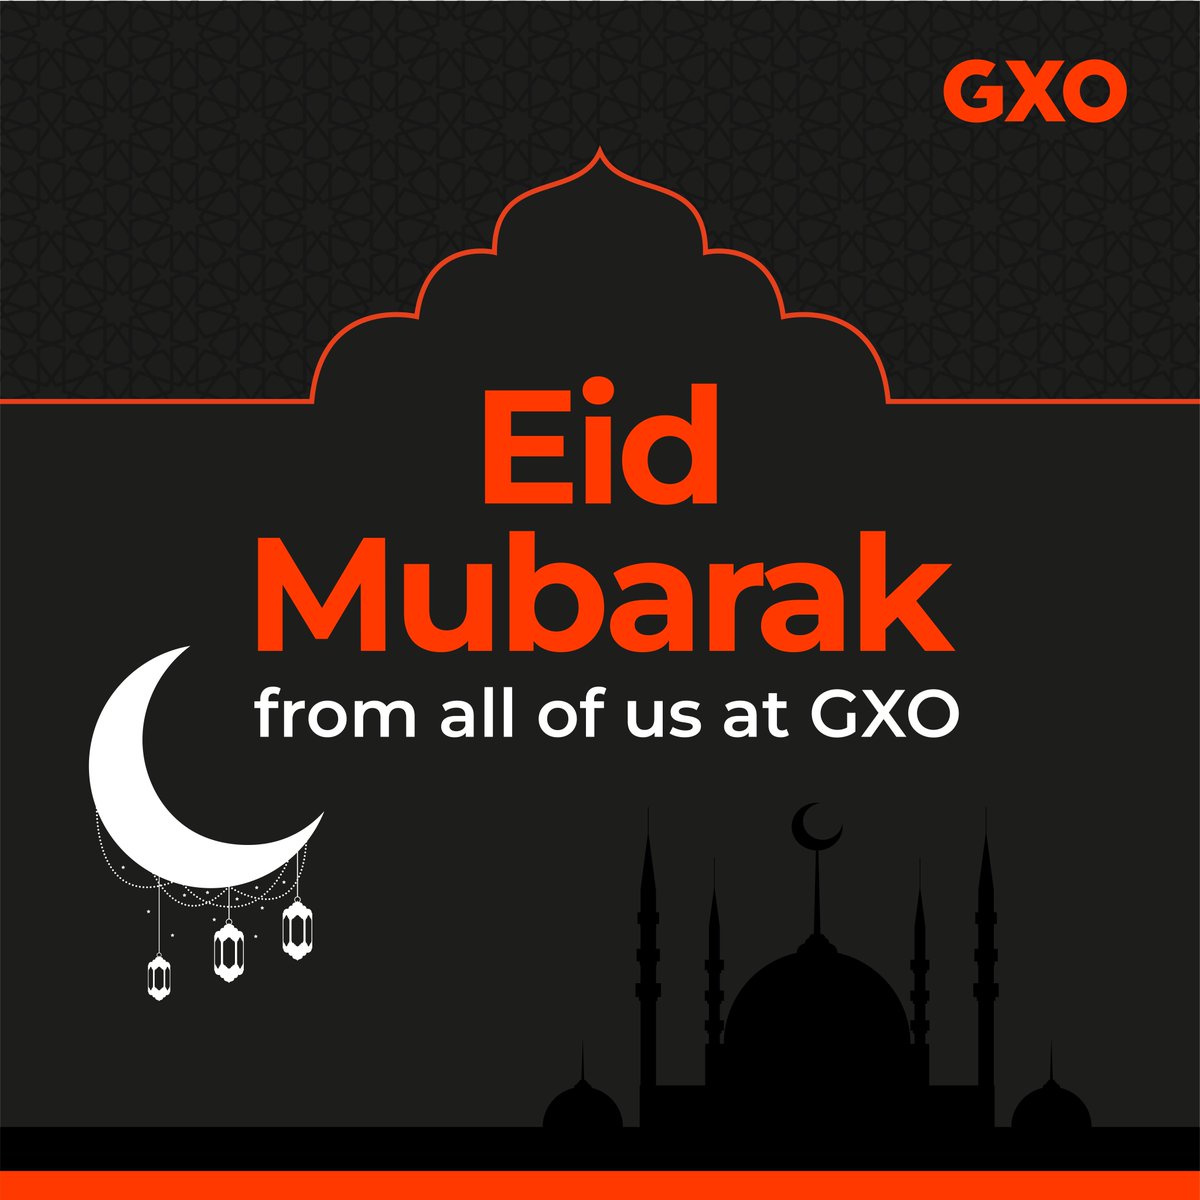 Happy Eid al-Fitr! Our #GameChangers around the world are celebrating the end of Ramadan, honoring the spirit of unity, compassion and gratitude. We hope this Eid brings peace and joy to you and your families.